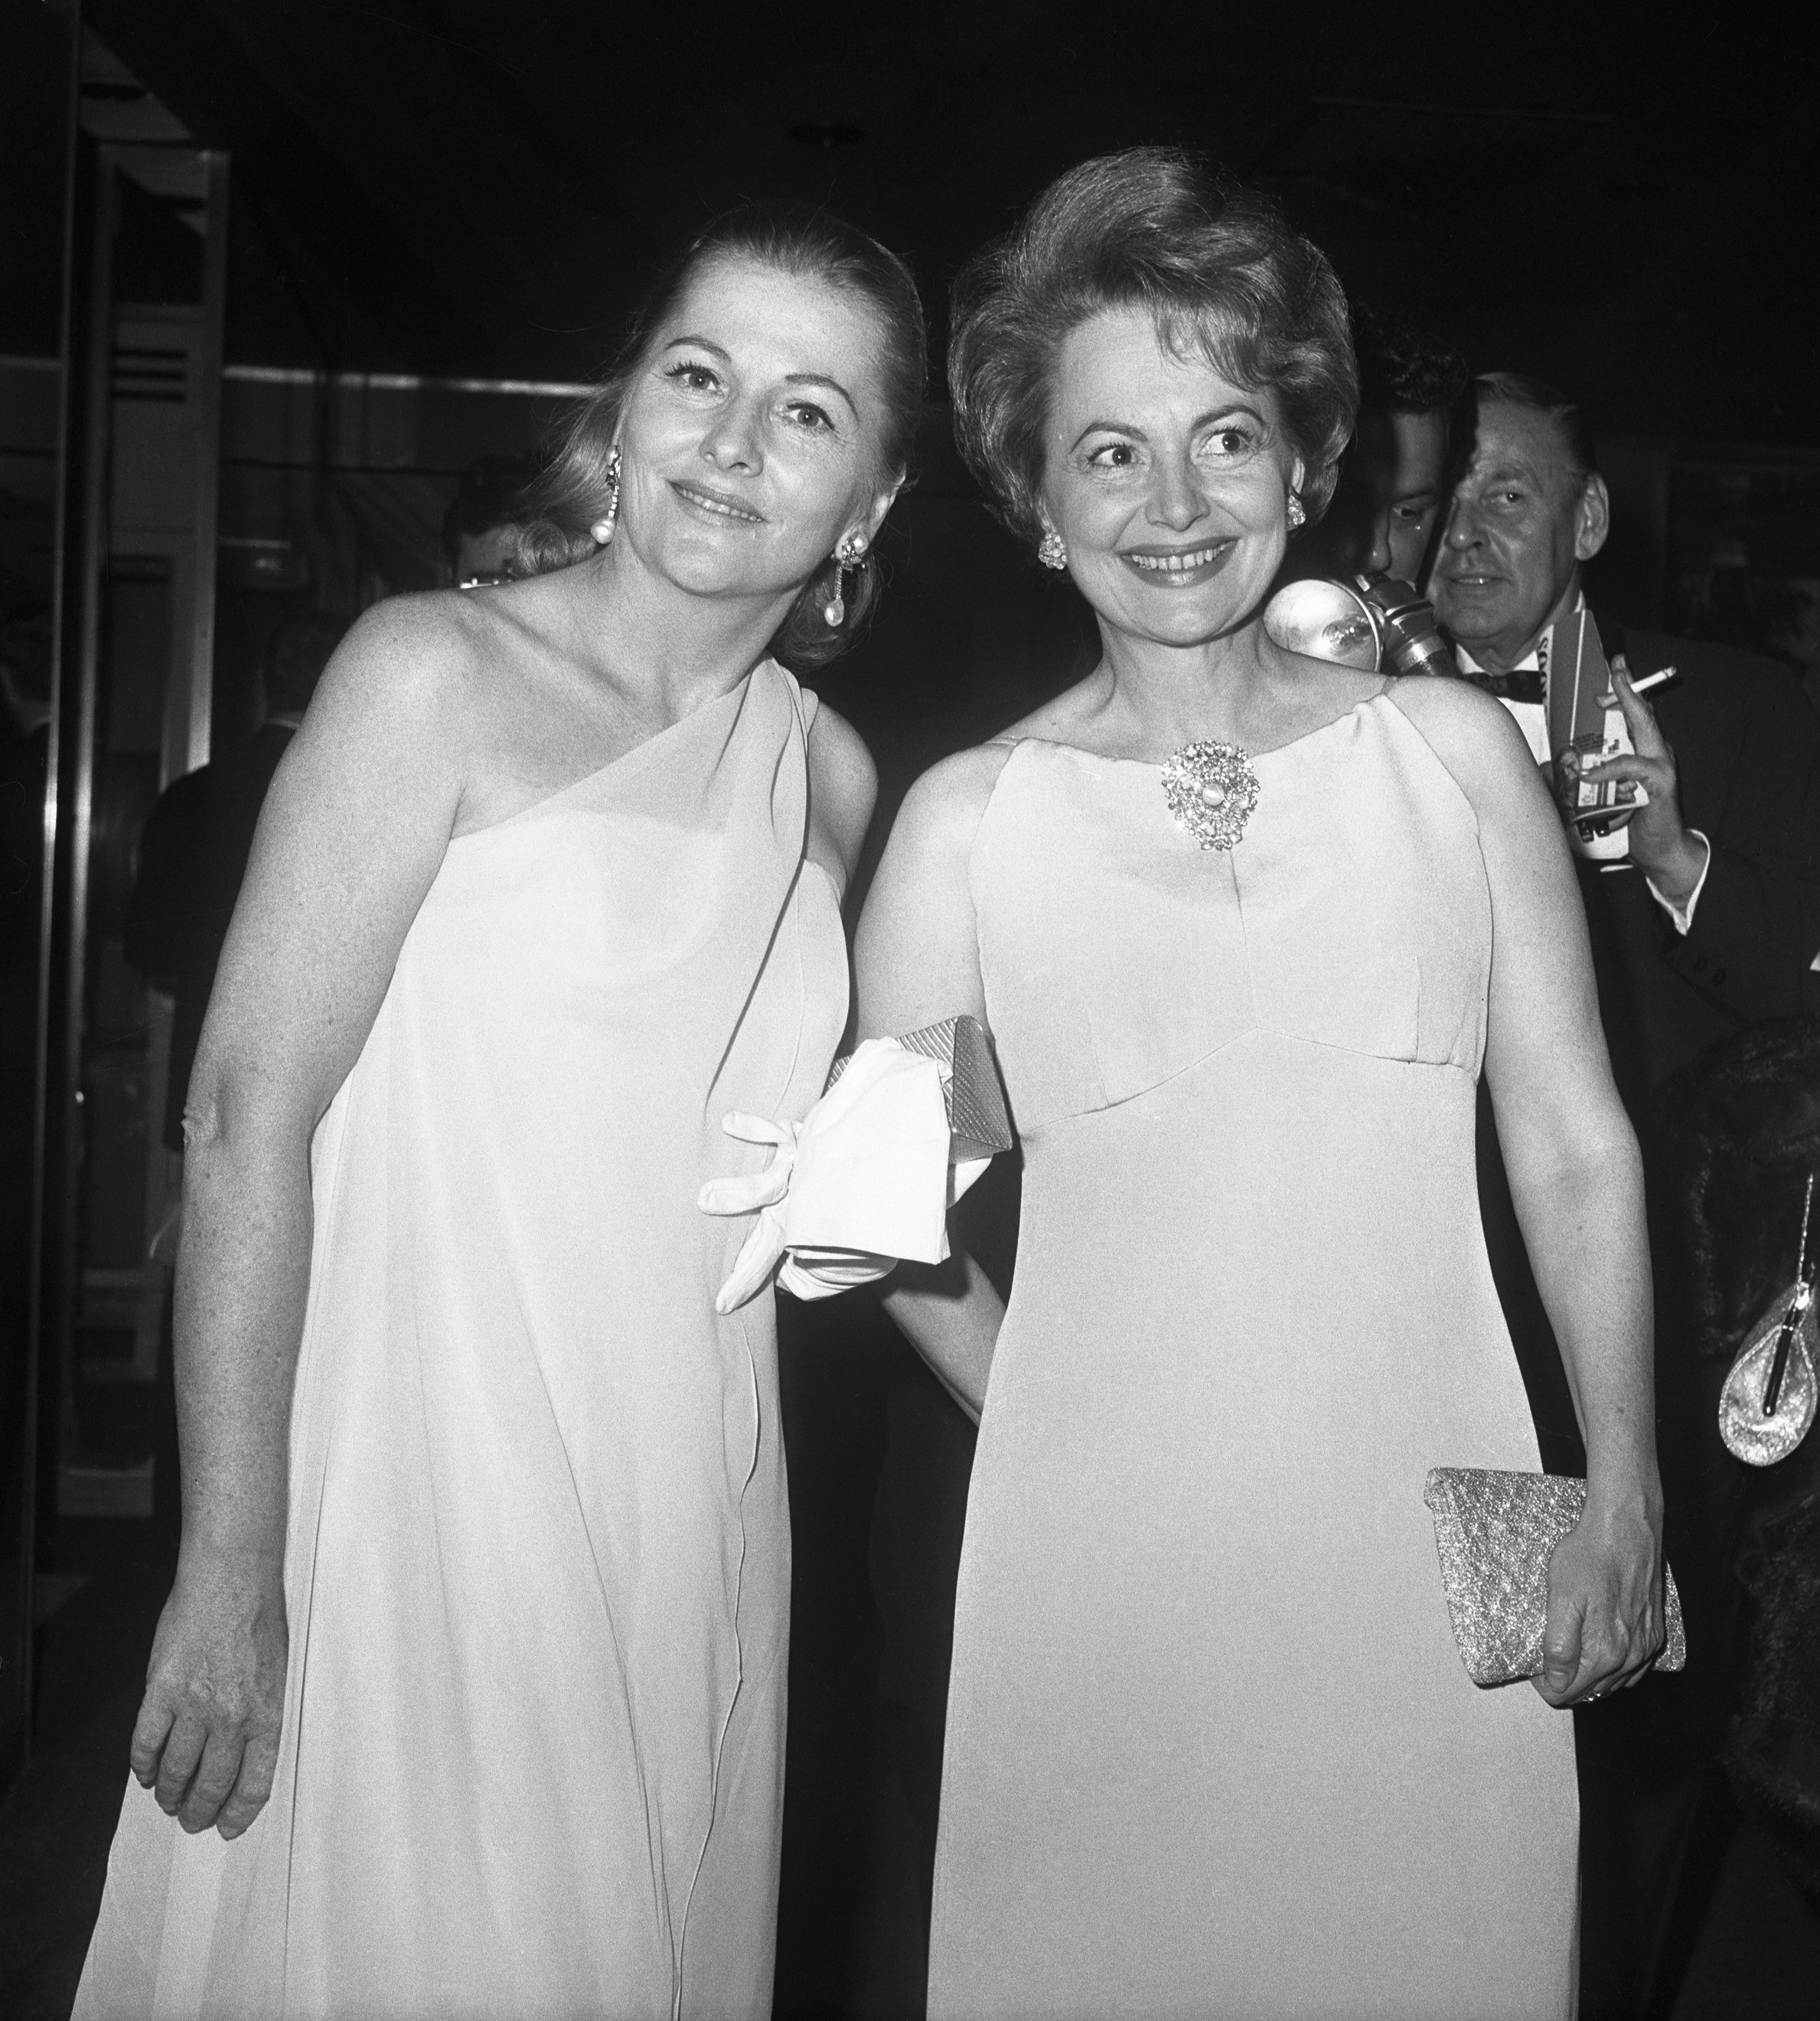 Olivia de Havilland and sister Joan Fontaine during Marlene Dietrich's Opening Party - September 9, 1967 at Rainbow Room in New York City, NY. | Source: Getty Images